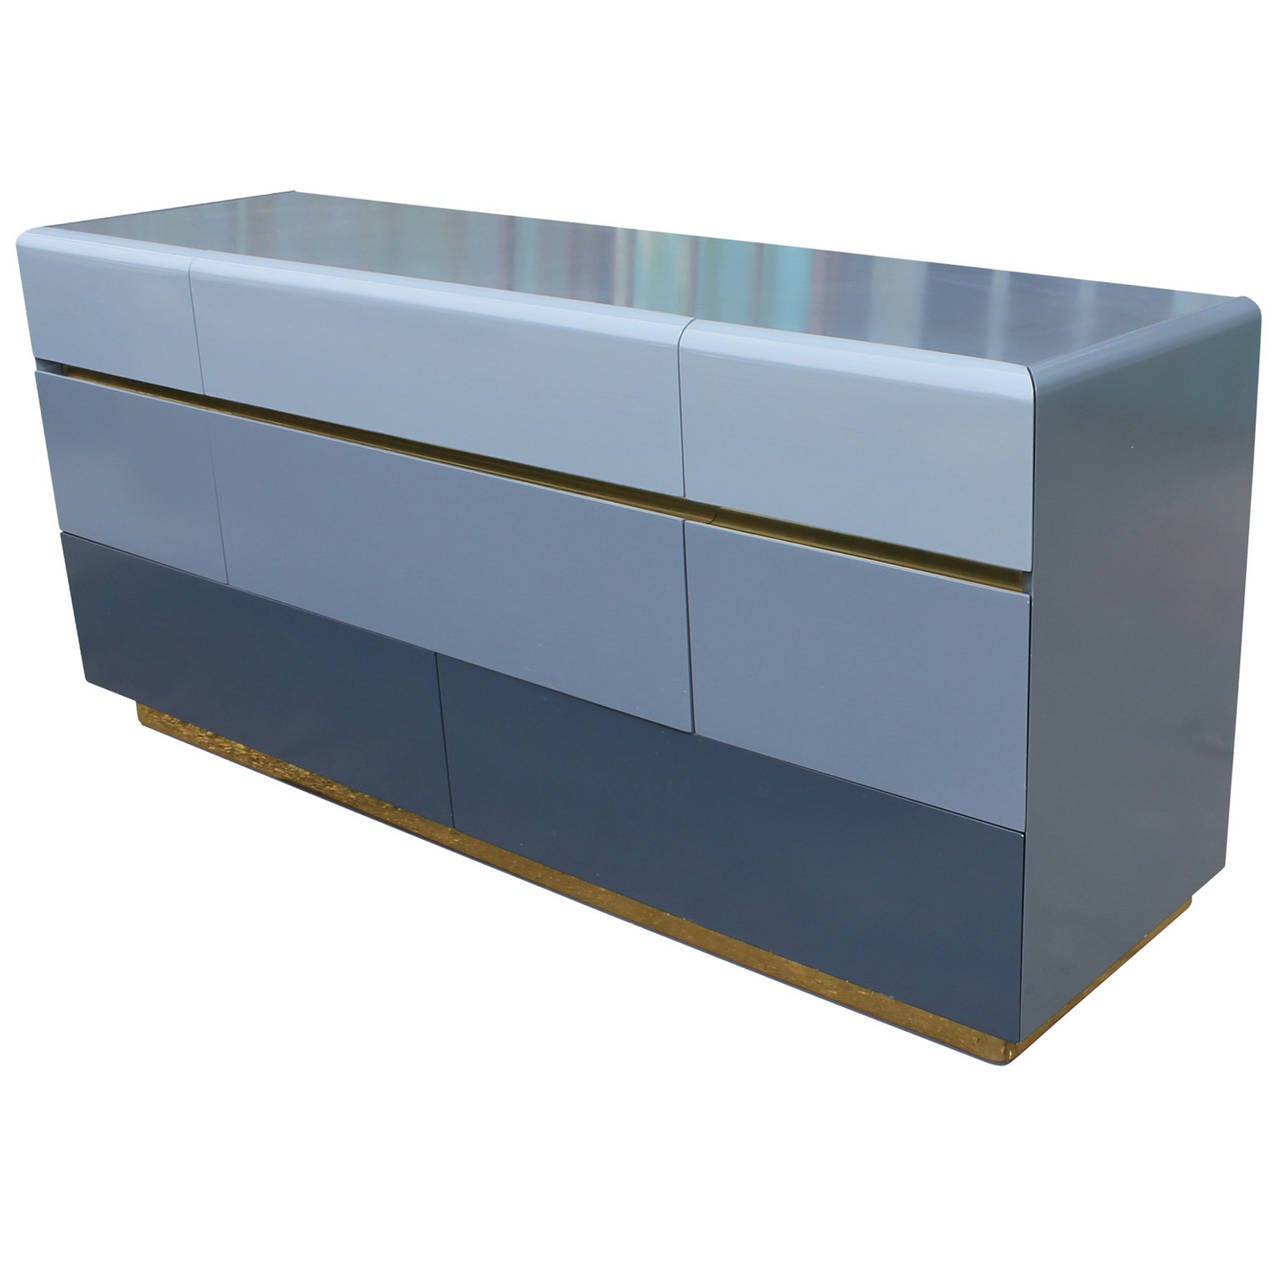 One of a kind dresser finished in an ombred high gloss lacquer. Base is wrapped in a shiny brass with another brass accent peeking out below the first drawer. Eight drawers provide ample storage.